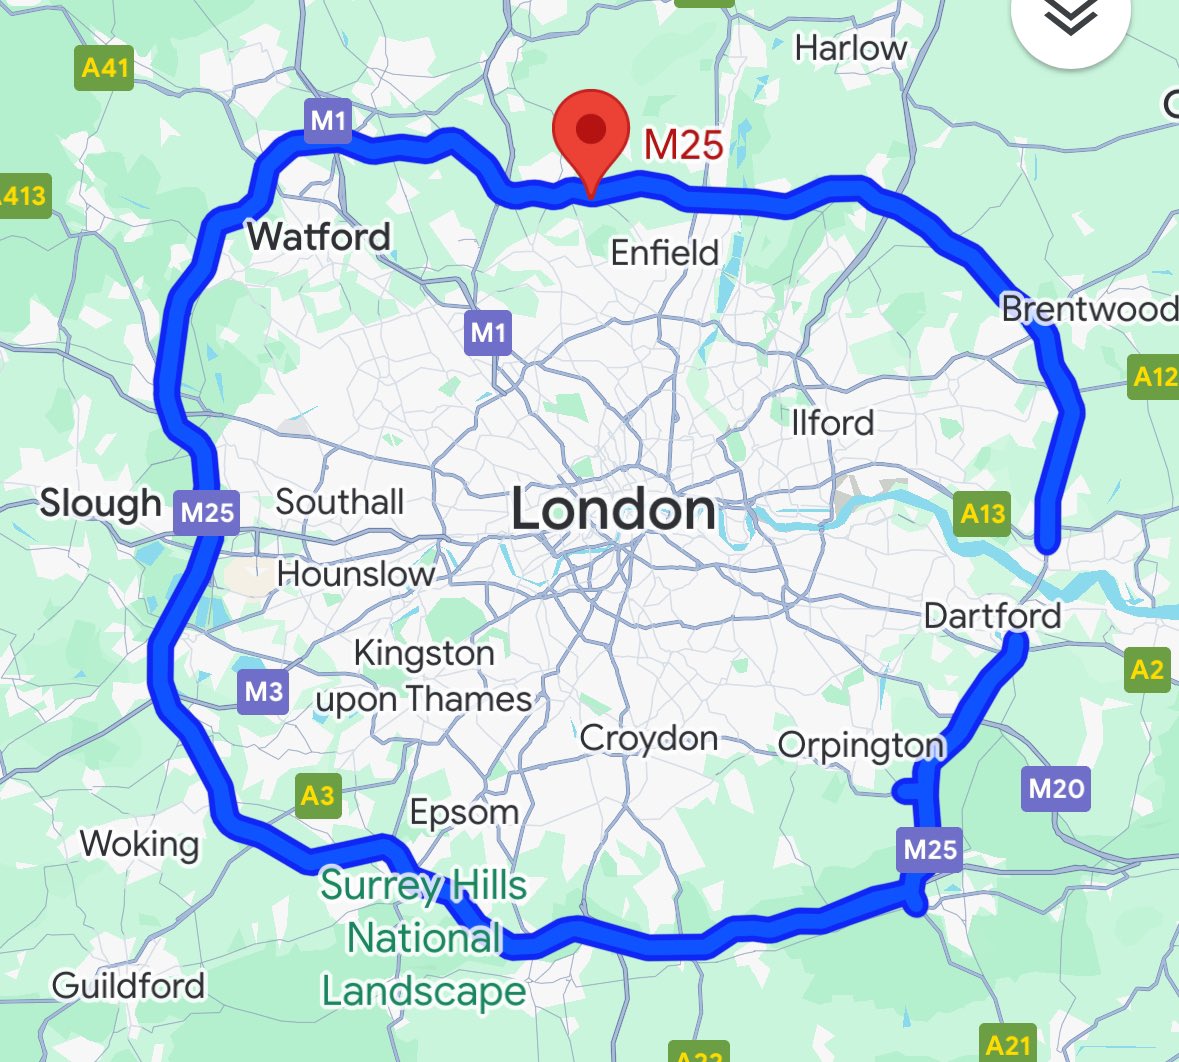 It’s difficult to comprehend how much £1 billion actually is With £1 billion, you could buy EVERY vehicle on the M25 during rush hour That’s every vehicle on a congested, 117-mile, 4-lane highway surrounding London And that’s still less than 1% of some individual’s wealth